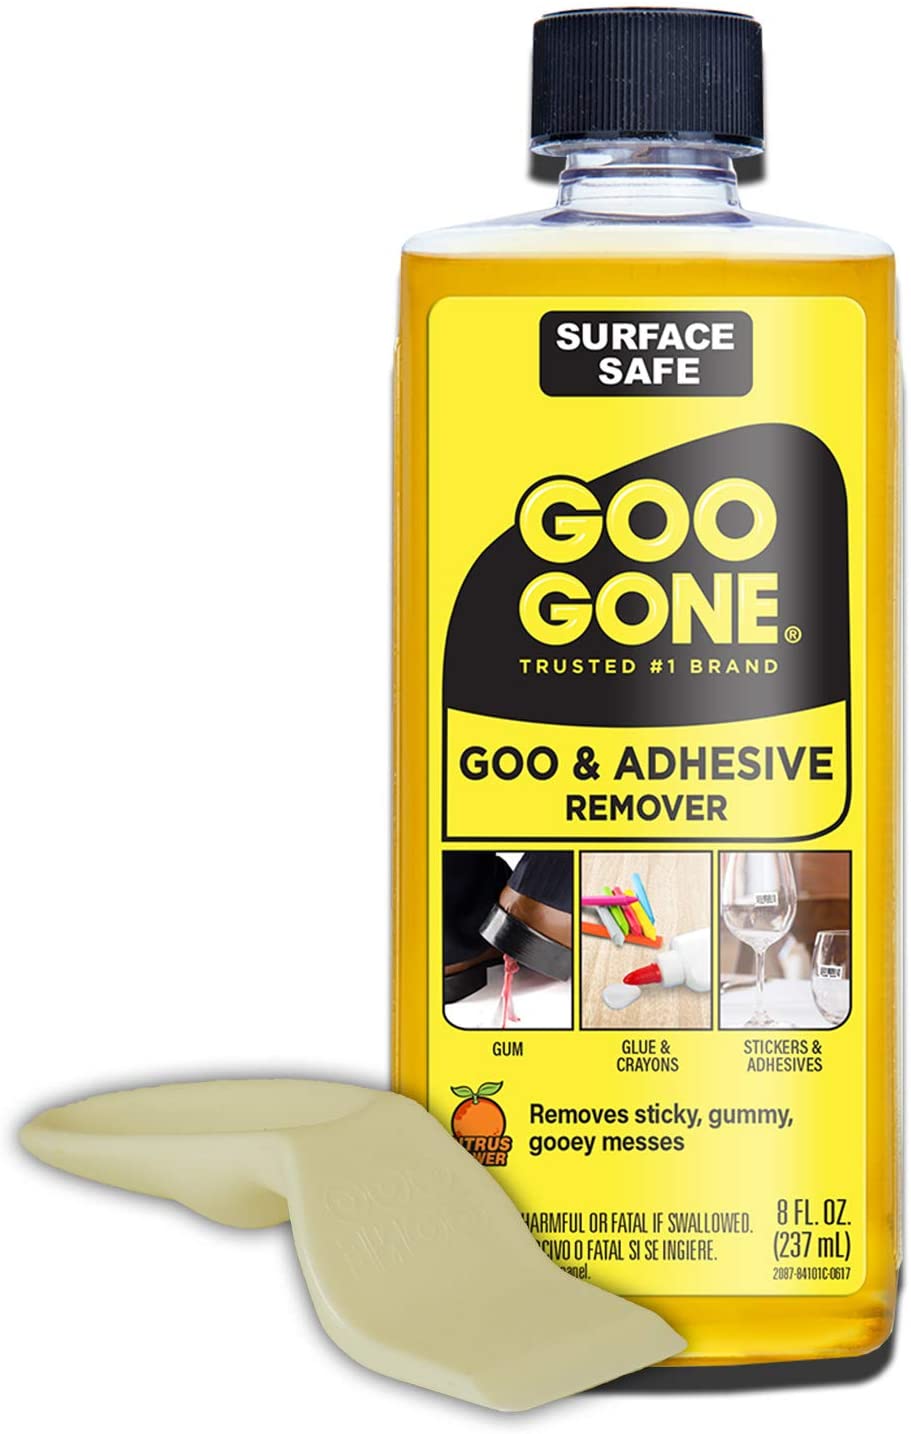 How To Remove Glue Adhesive